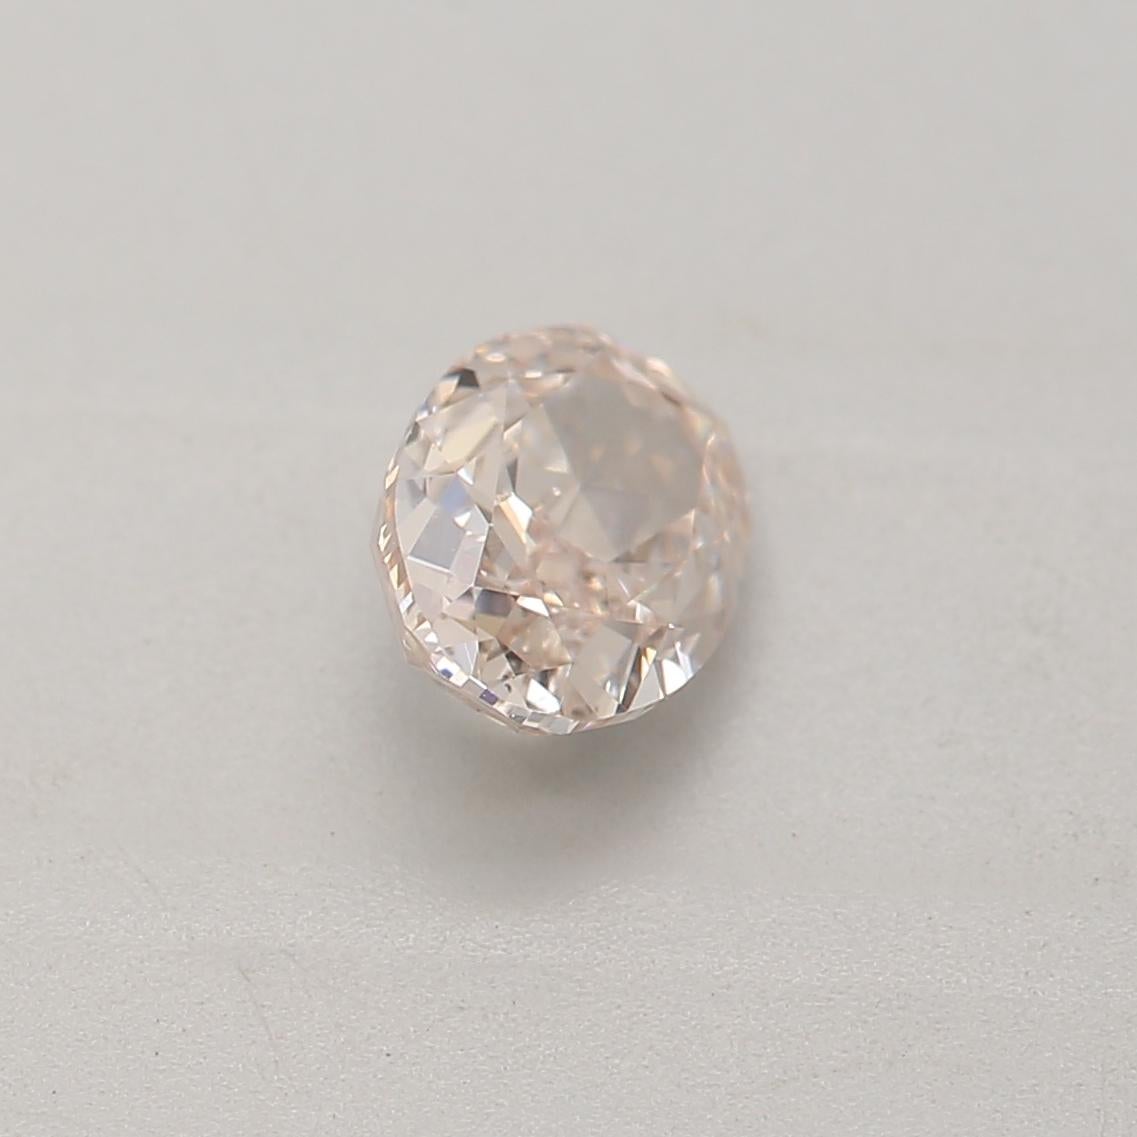 Women's or Men's 0.42 Carat Light Pink Brown Oval Cut Diamond SI2 Clarity GIA Certified For Sale